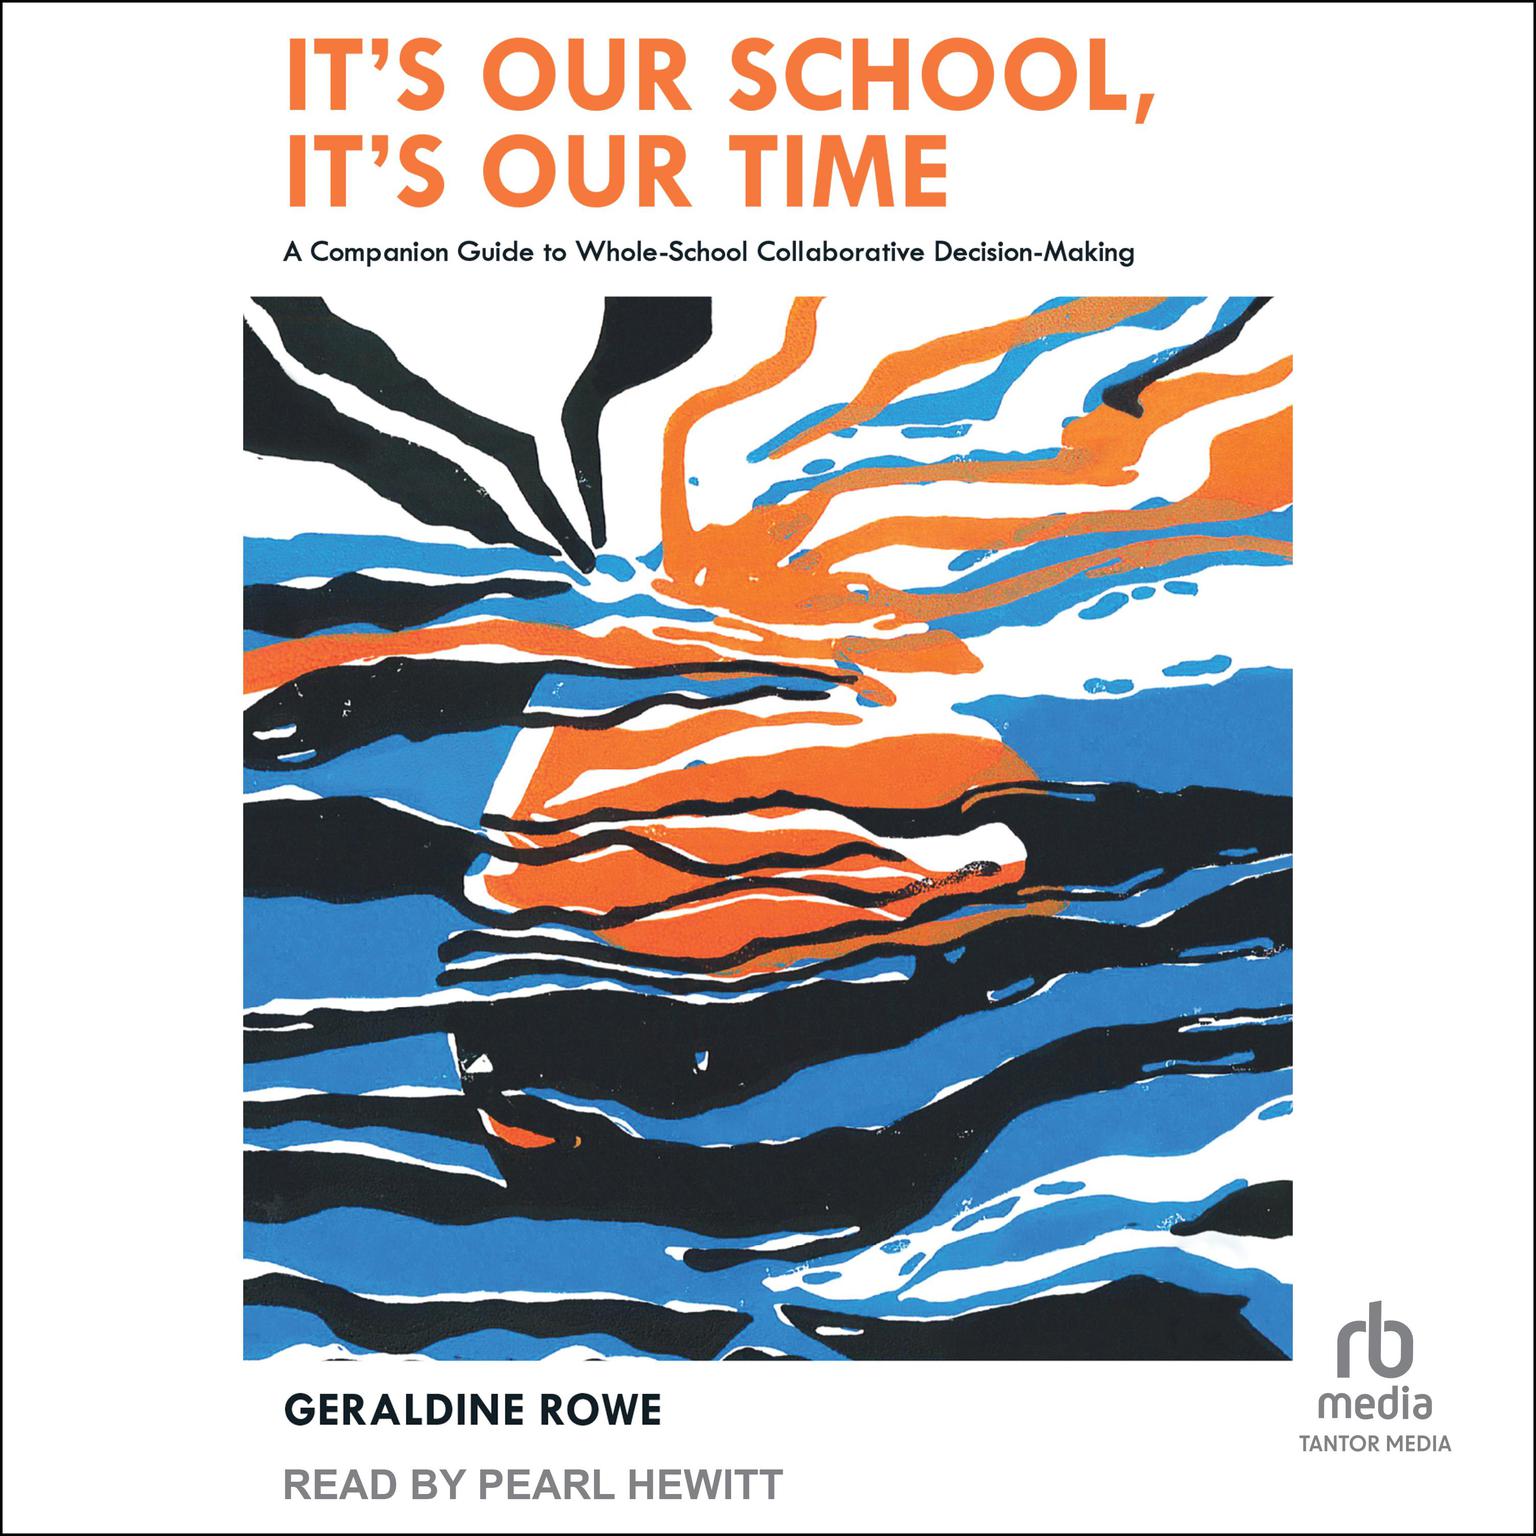 Its Our School, Its Our Time: A Companion Guide to Whole-School Collaborative Decision-Making Audiobook, by Geraldine Rowe